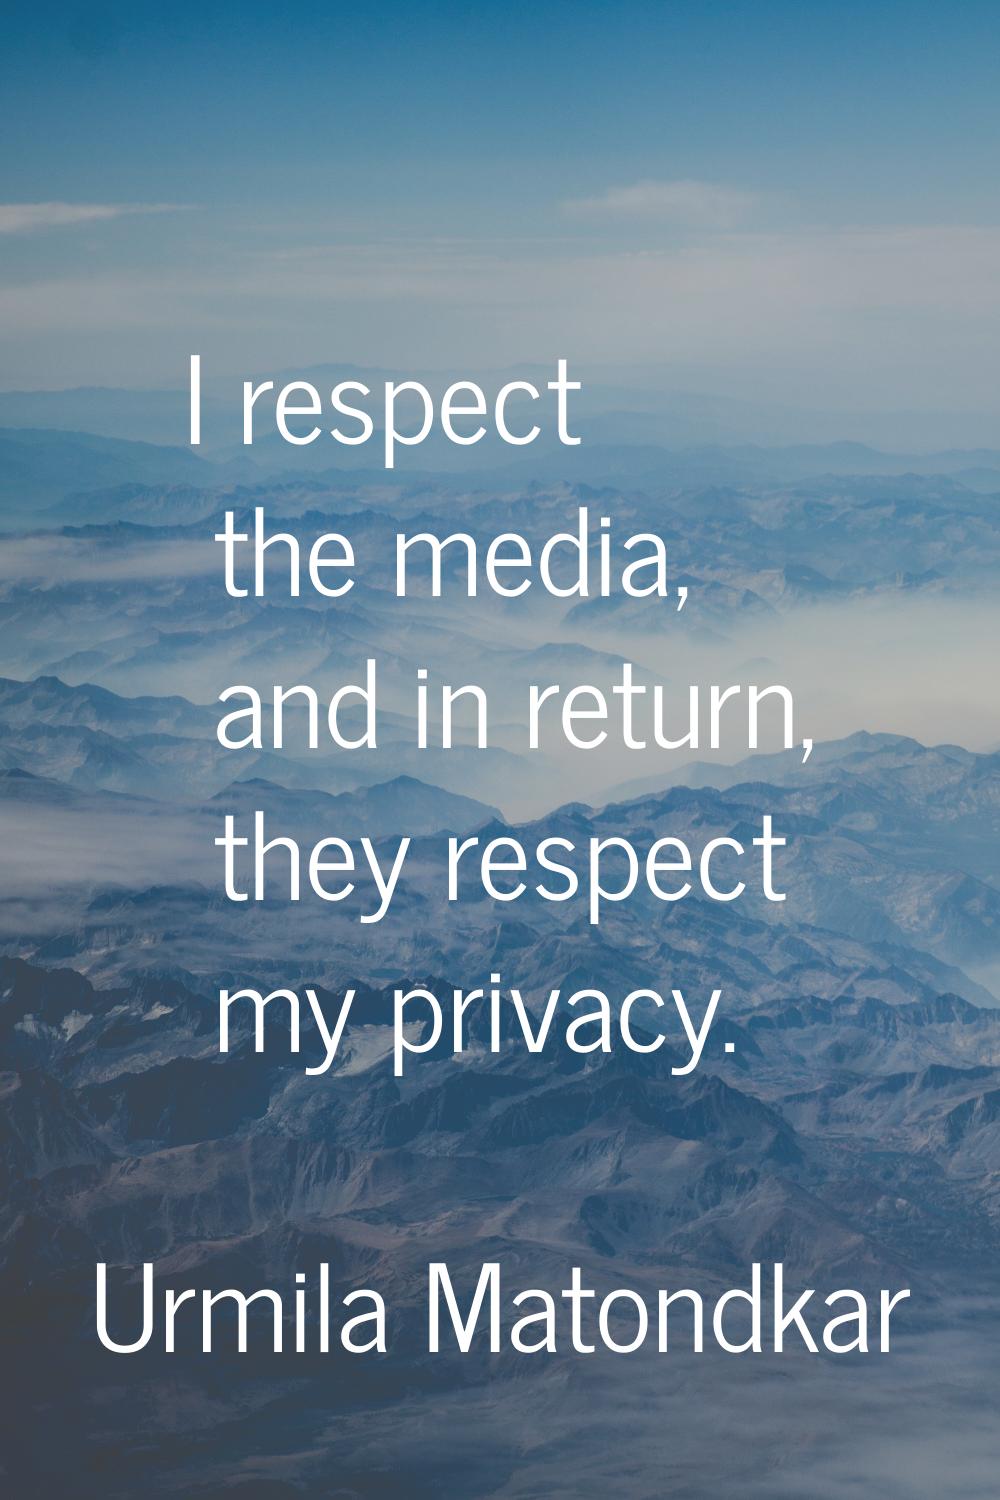 I respect the media, and in return, they respect my privacy.